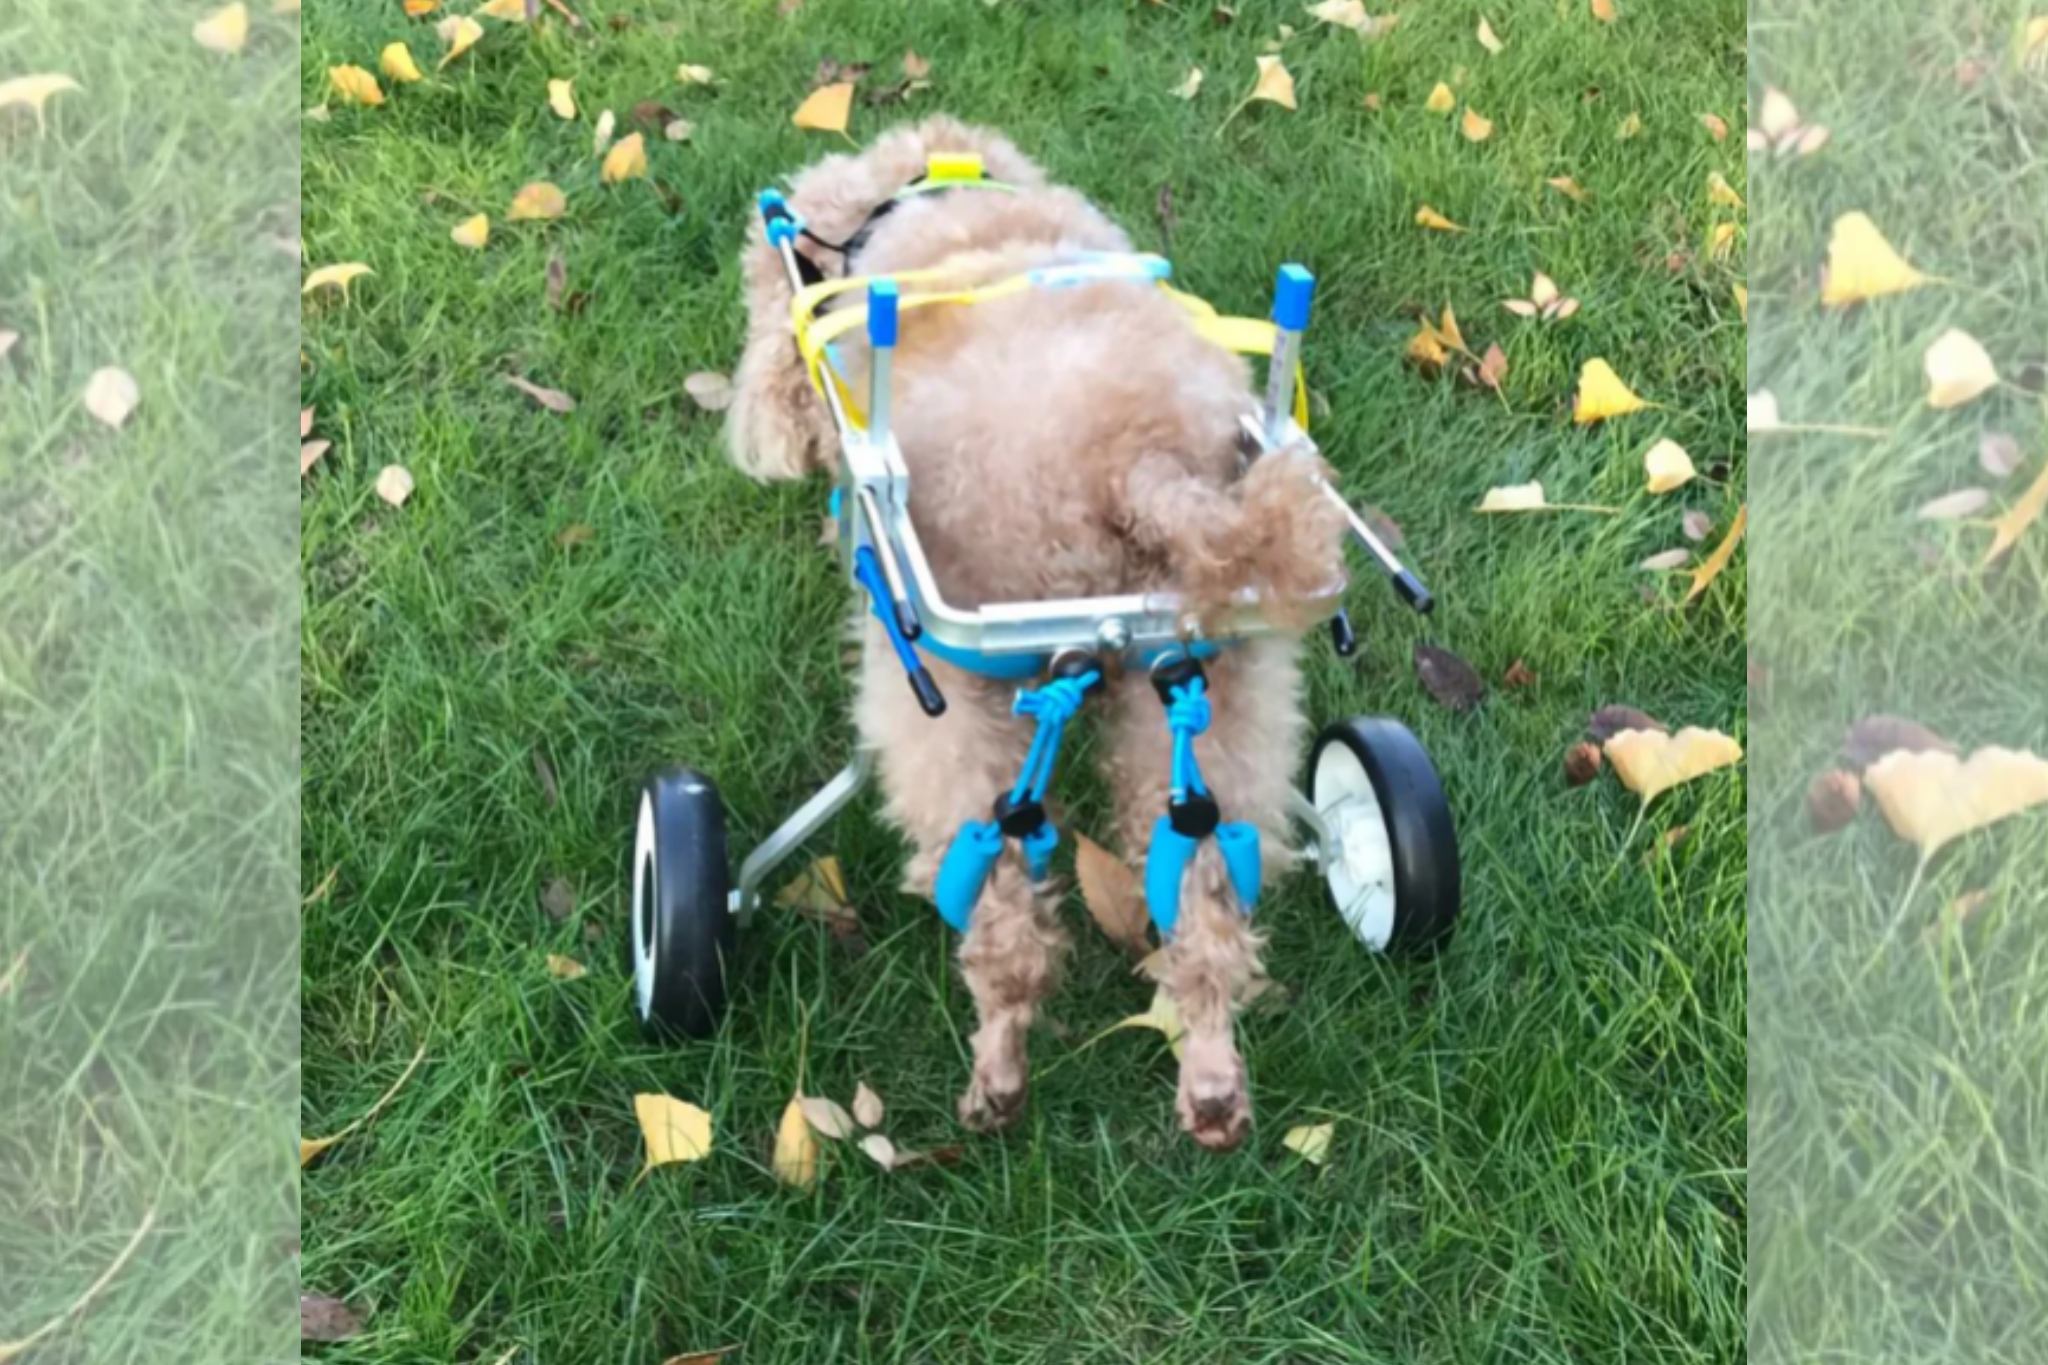 What wheels do dogs that can't walk use?